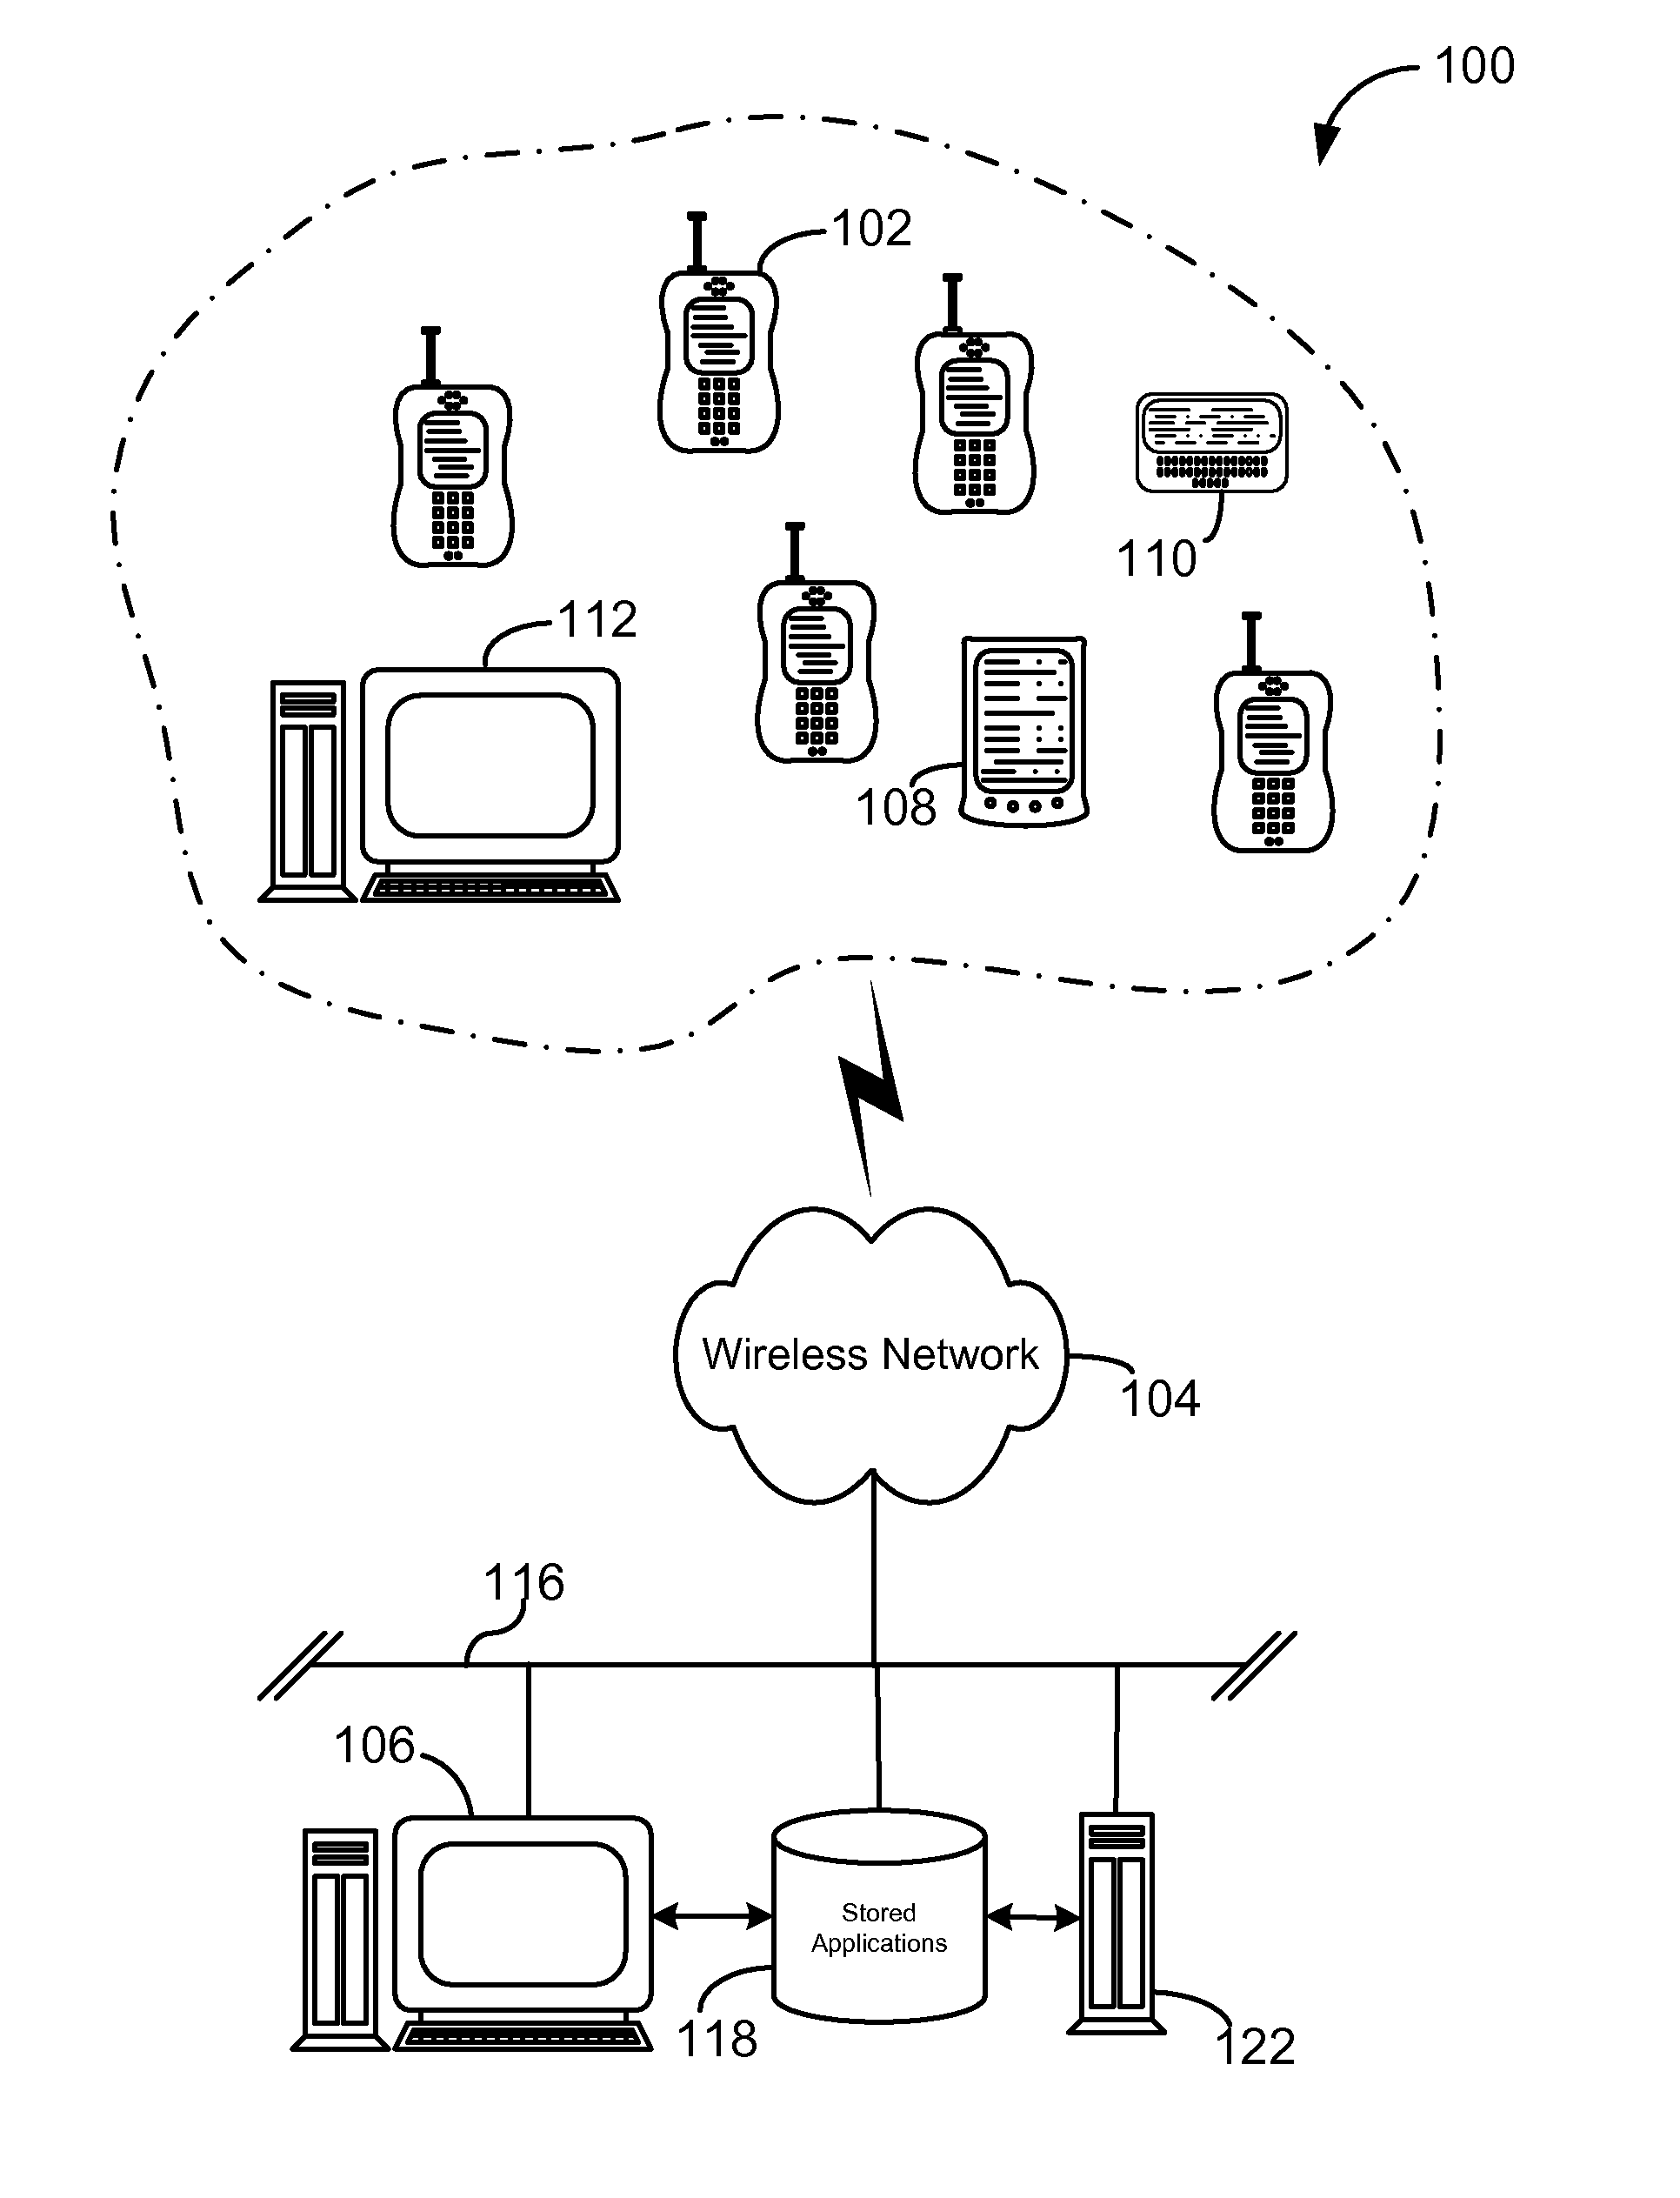 Server based technique for optimizing call setup latency for geographically dense groups